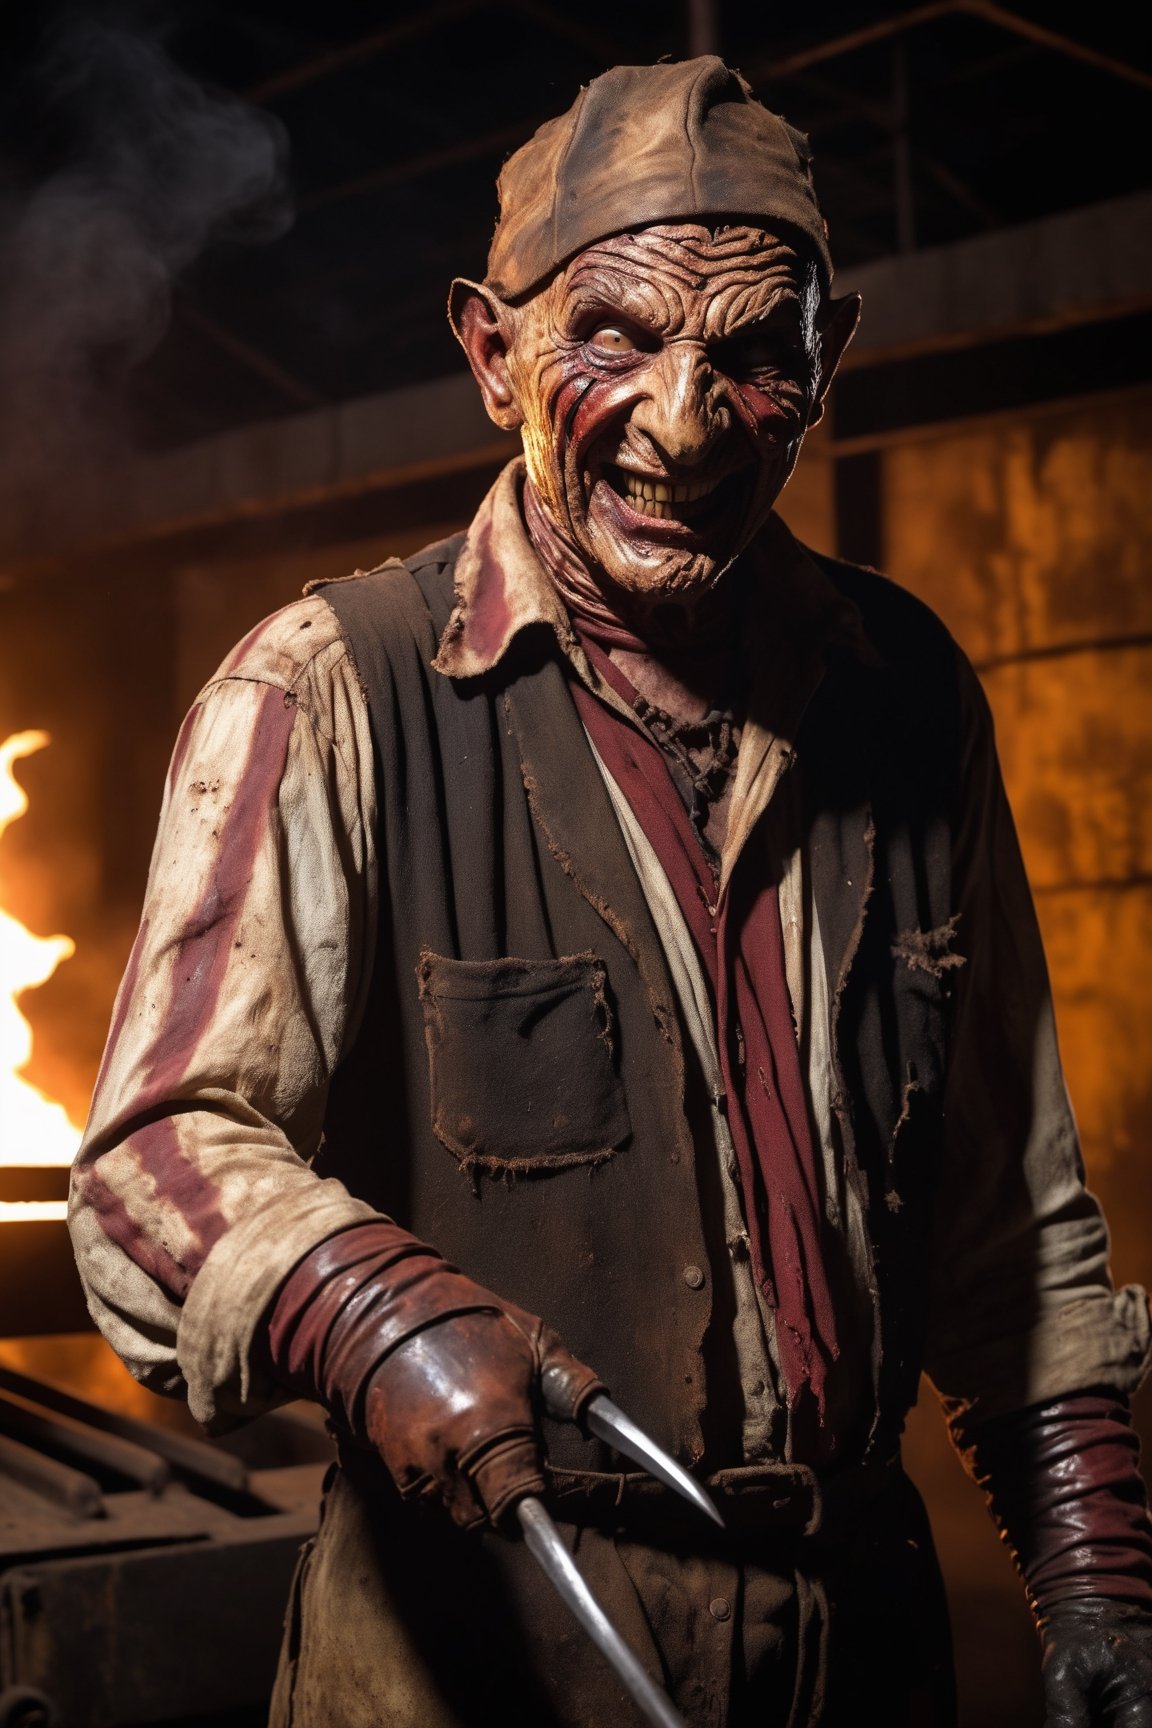 Freddy Krueger, evil smile, ragged shirt, wearing glove with long claws on right hand, inside old warehouse, dim light, big rusty iron oven, faucets leaking, fire, from behind 